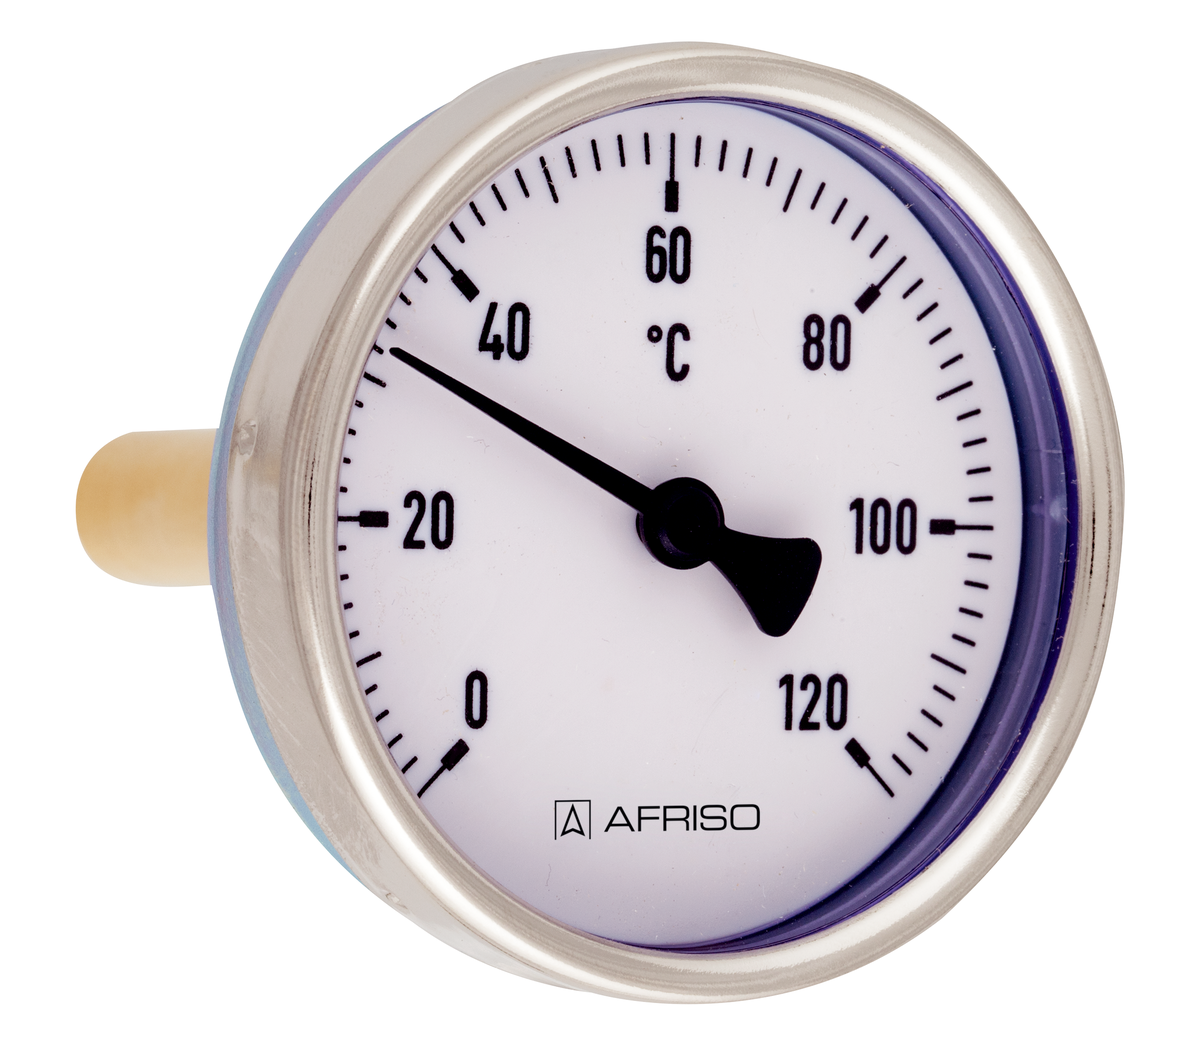 AFRISO Bimetall-Thermometer BiTh 50 ST 0/60C 40mm G1/2B axial Kl.2 SAL 88350 88360 88370 88380 88400 88410 88420 88430 88460 88470 88480 88490 88510 88520 88530 88540 88560 88570 88580 88590 88610 88620 88630 88640 88670 88680 88690 88700 88720 88730 88740 88750 88770 88780 88790 88800 88810 88830 88840 88850 88860 88890 88900 88910 88920 88940 88950 88960 88970 88990 89000 89010 89020 89030 89050 89060 89070 89080